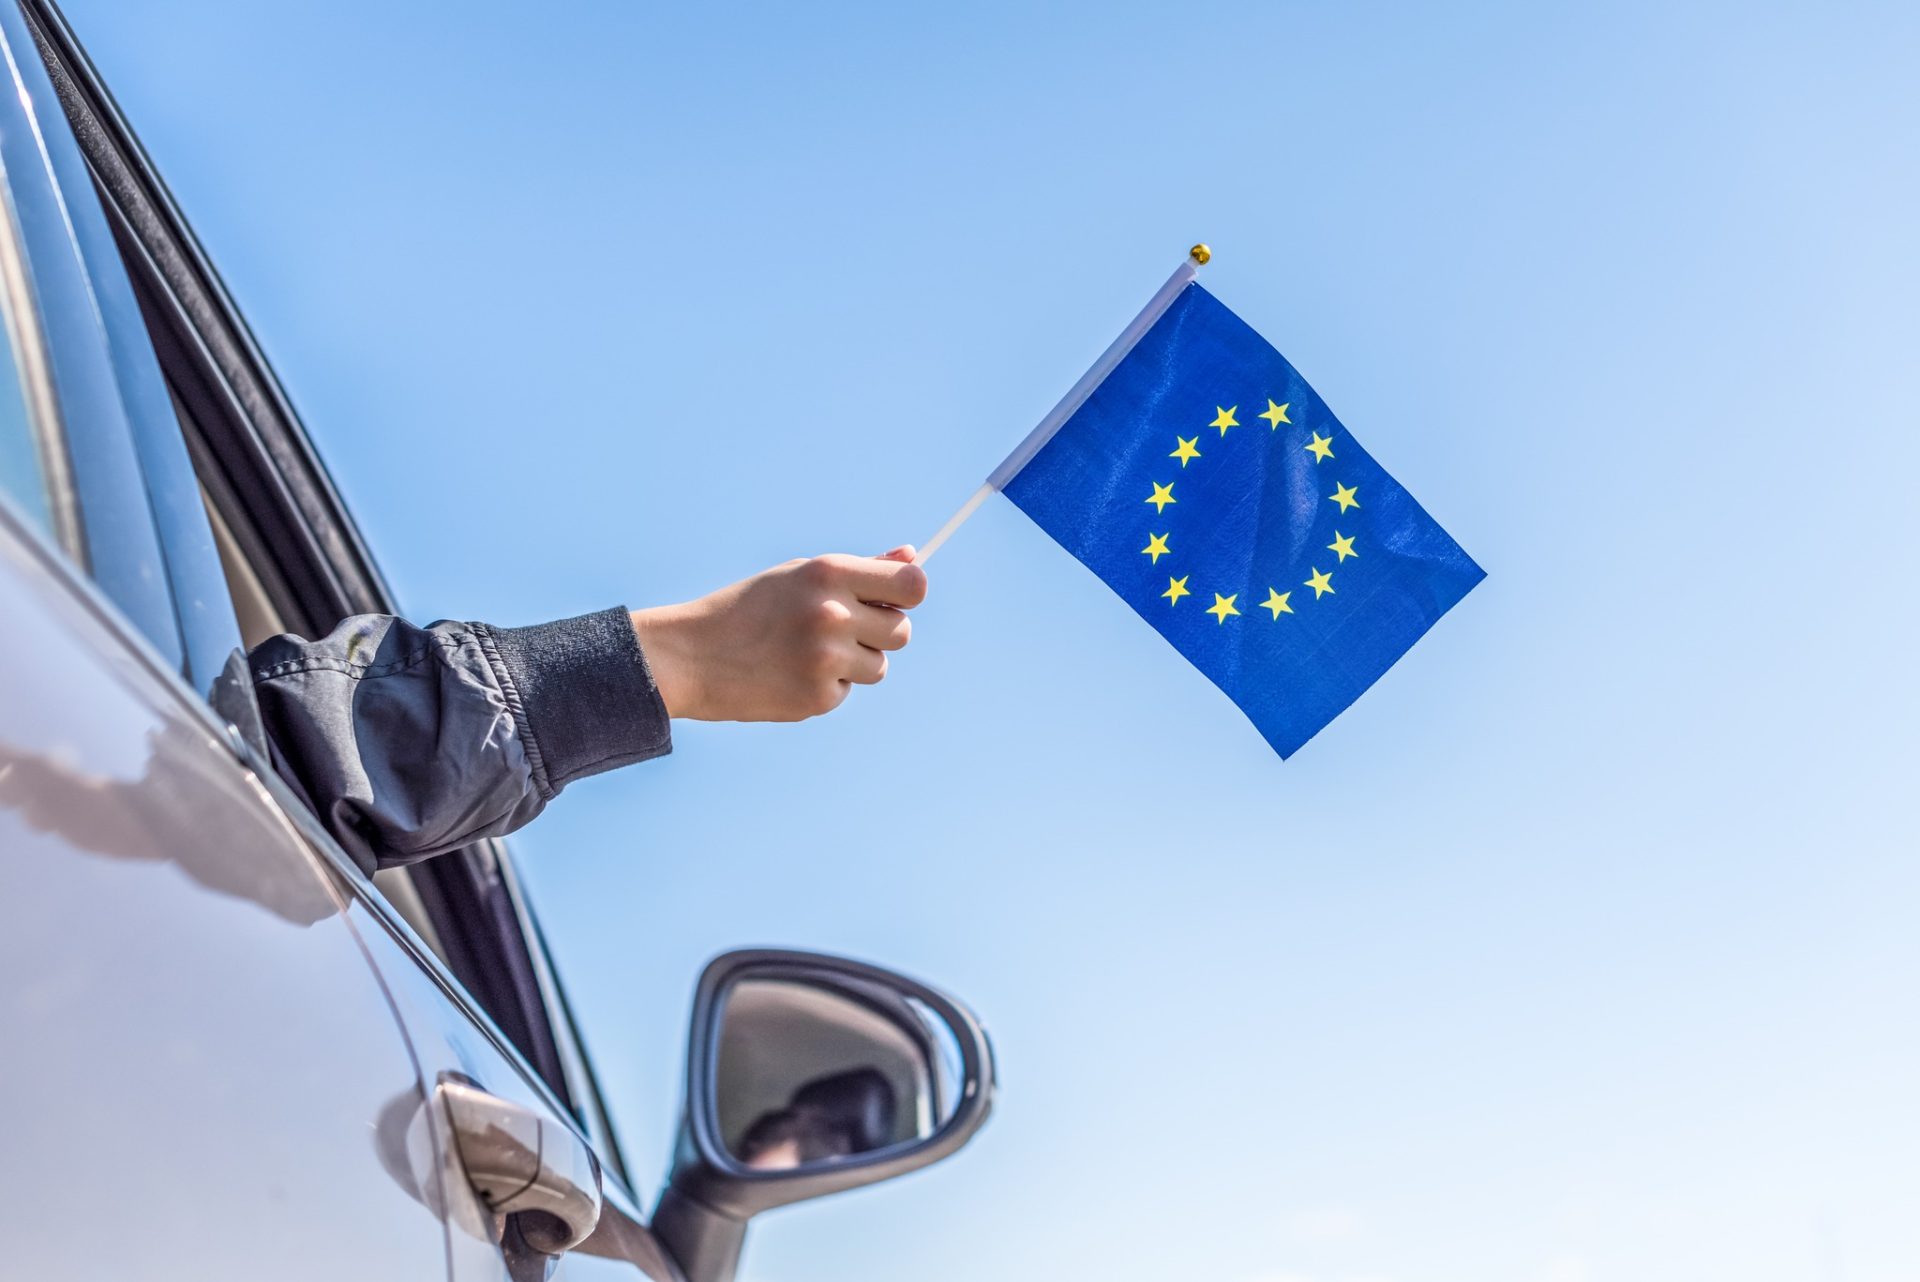 Boy holding Europe or European(EU) Flag from the open car window on the sky background. Concept.